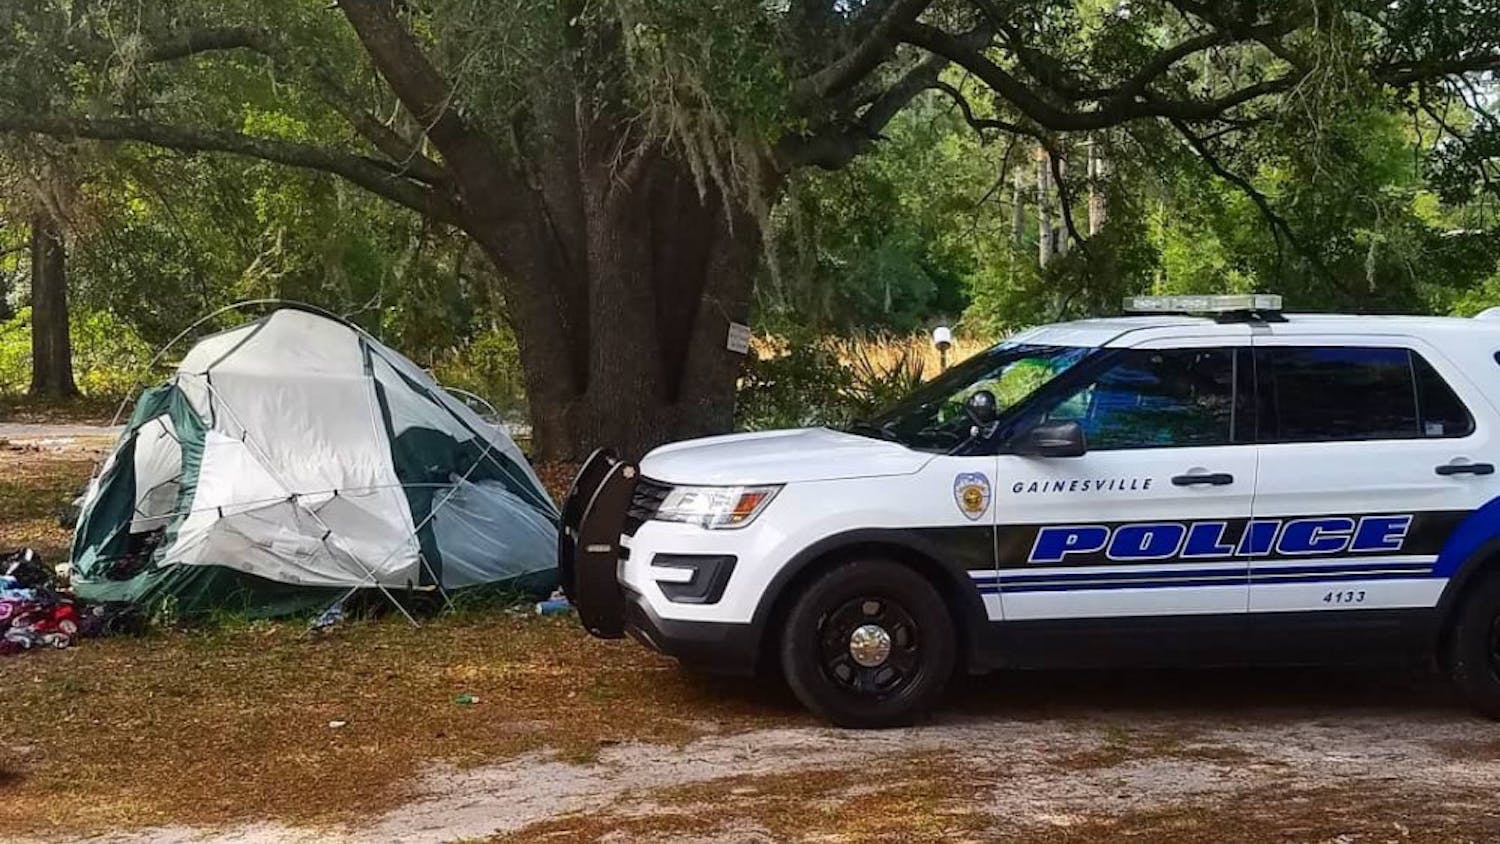 Gainesville Police assisted the Florida Department of Corrections in communicating with members of the encampment on FDC property.
&nbsp;